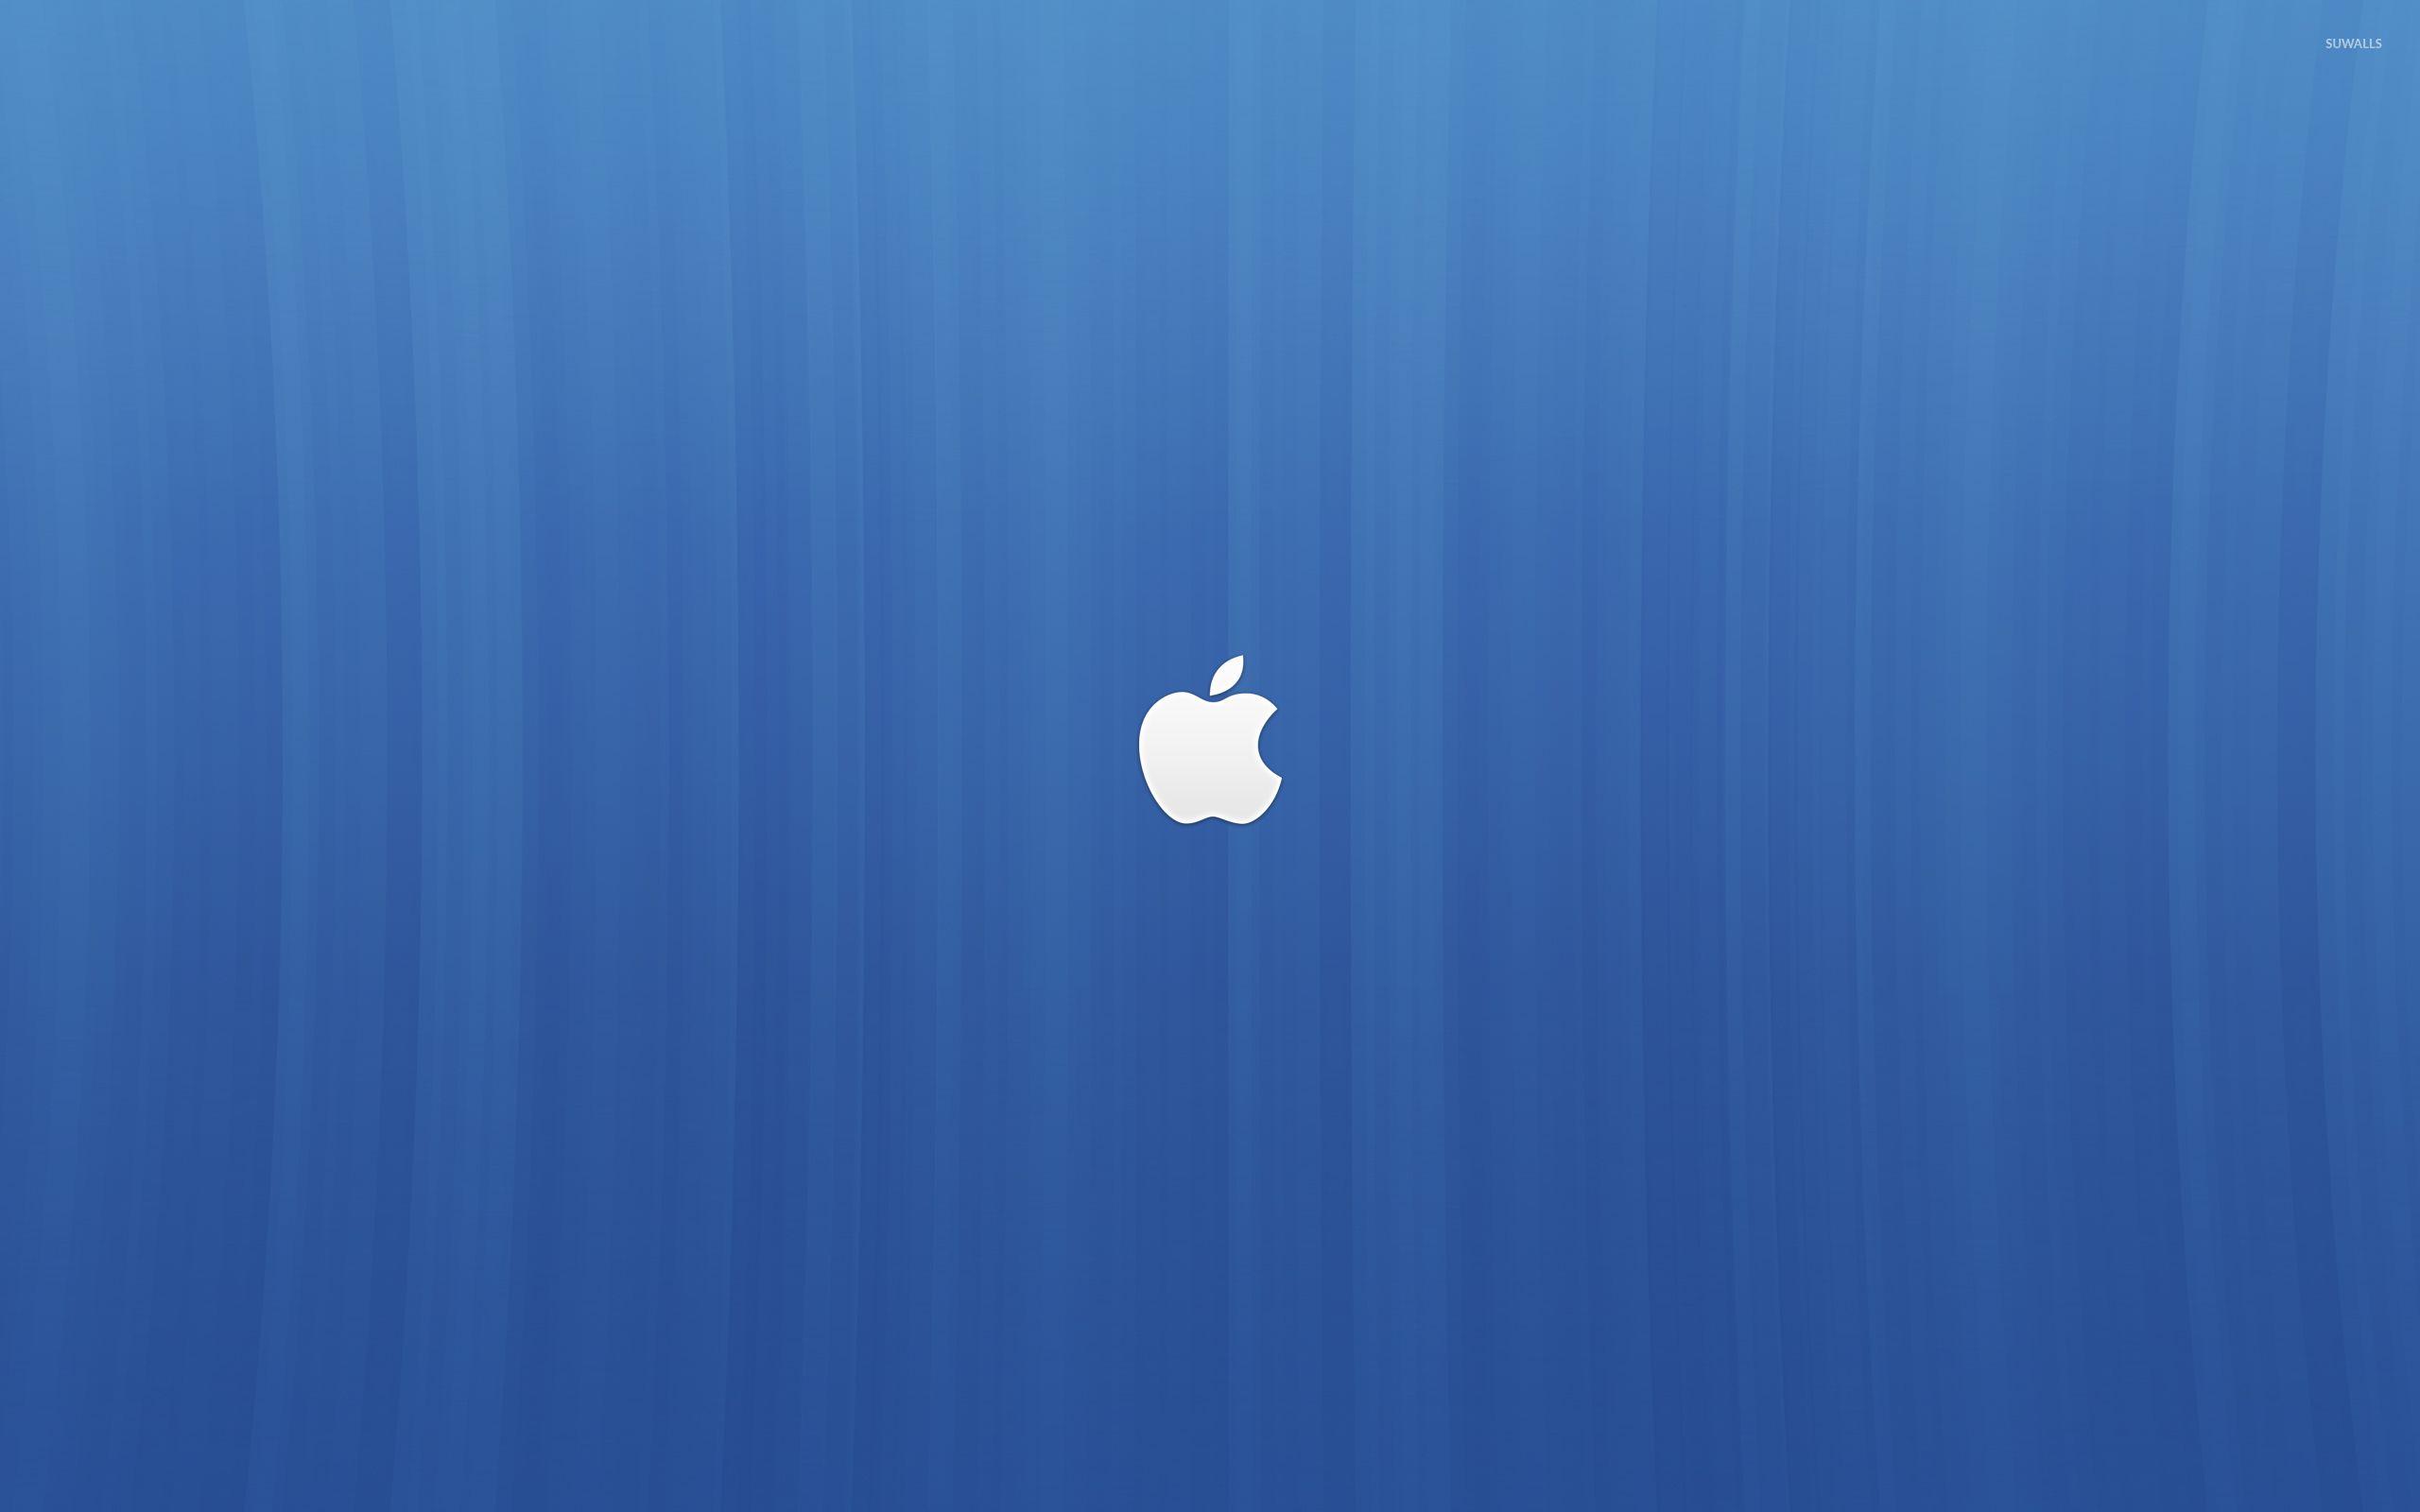 White and Blue Apple Logo - White Apple logo on blue lines wallpaper - Computer wallpapers - #54107